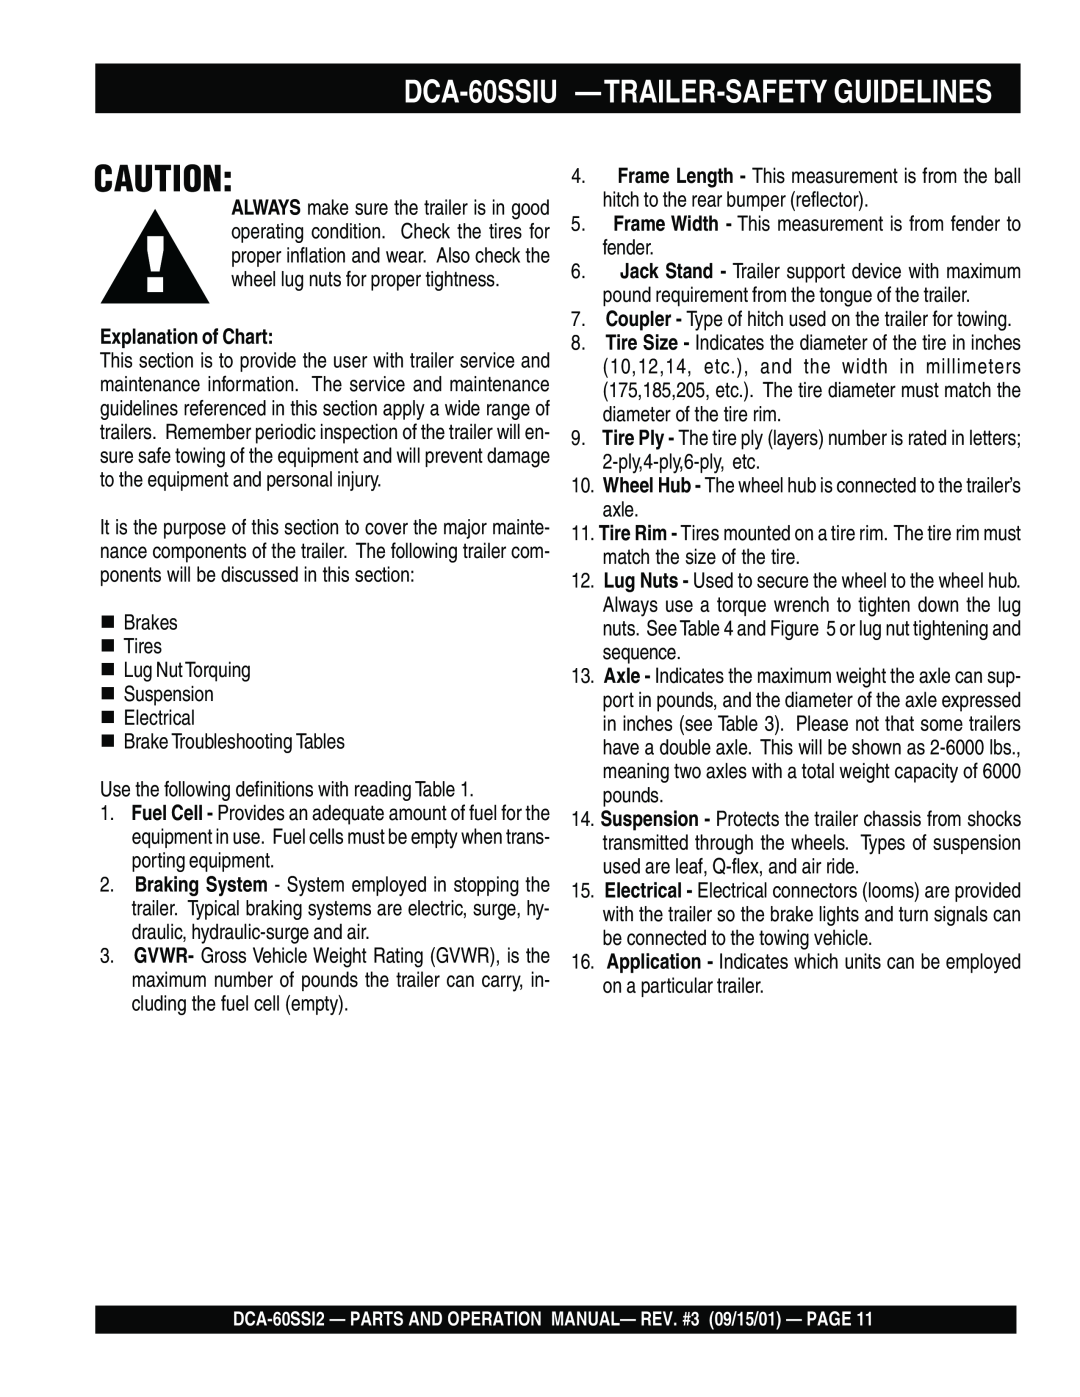 Multiquip DCA-60SS12 operation manual DCA-60SSIU —TRAILER-SAFETYGUIDELINES, Explanation of Chart 